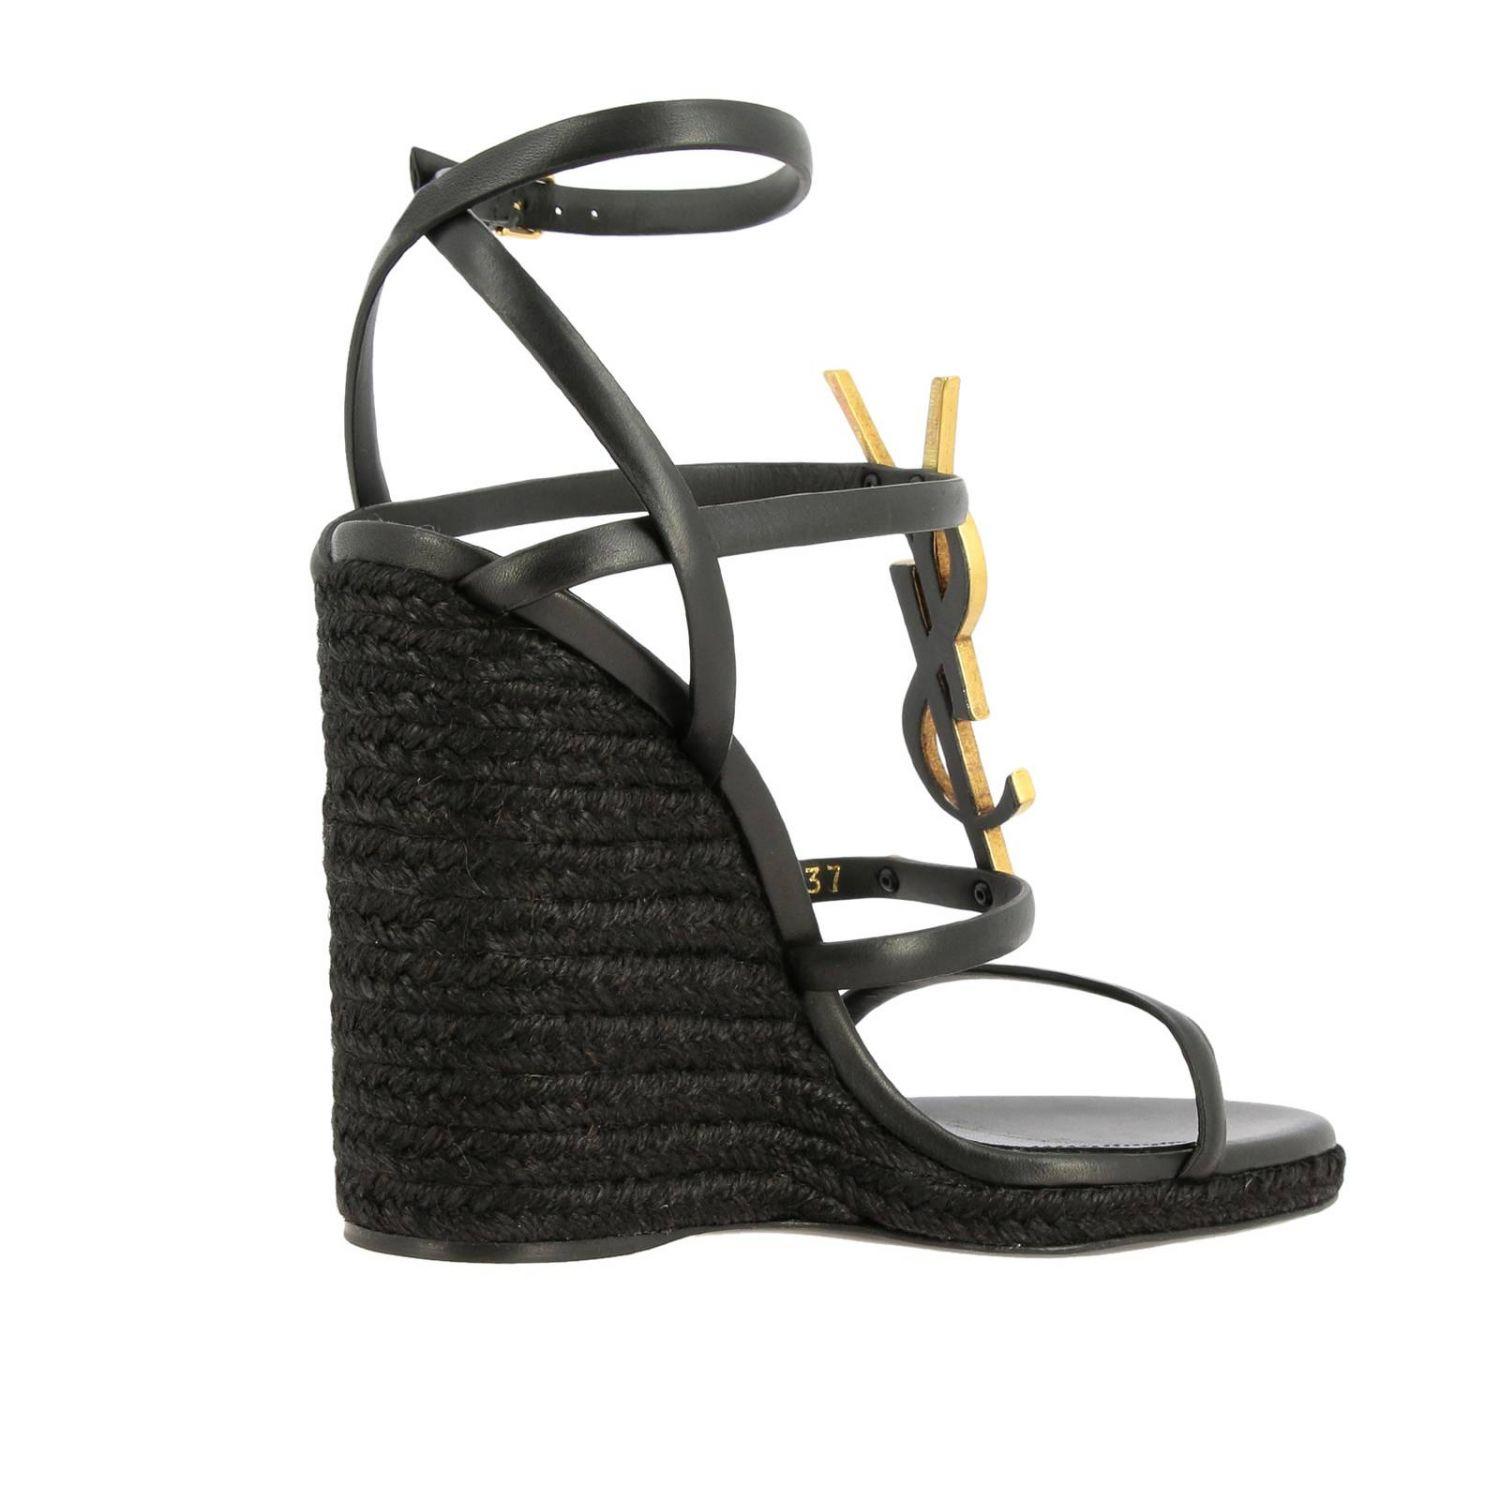 Saint Laurent Synthetic Leather Wedge Sandals With Ysl Monogram in ...